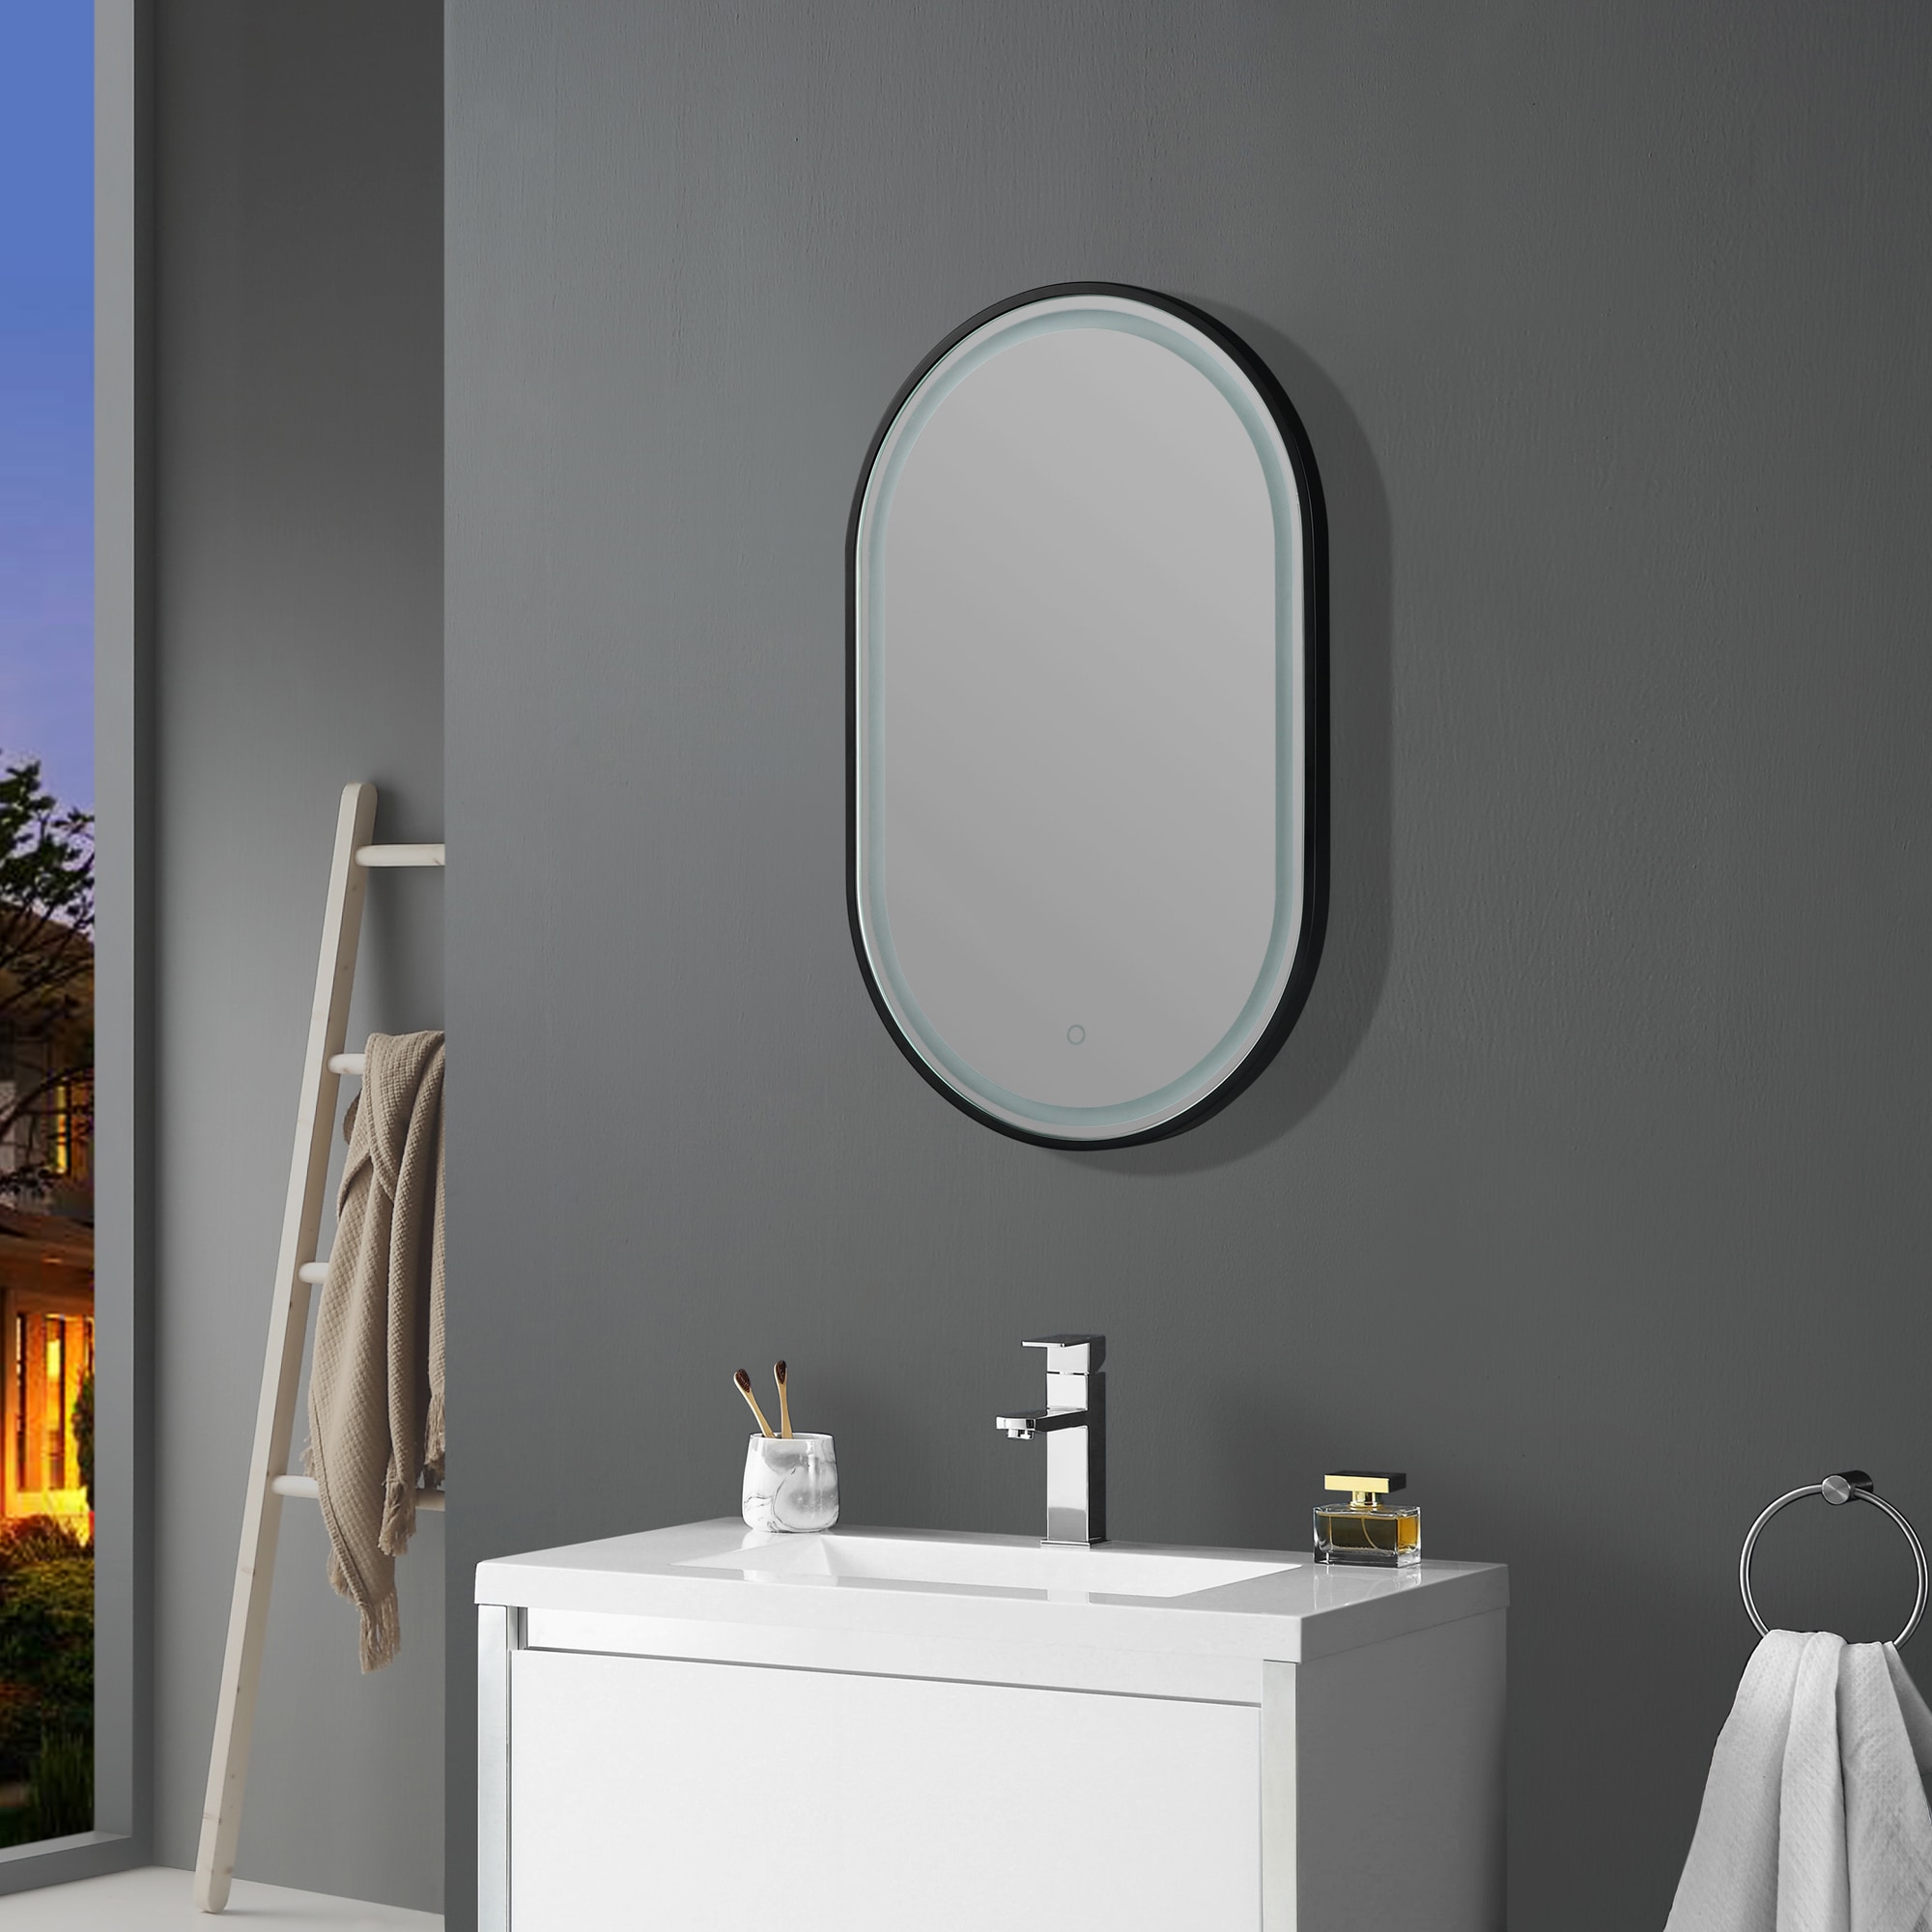 OVE Decors Amani 20.08-in W x 31.89-in LED Lighted Black Oval Framed Frameless Bathroom Vanity Mirror the Bathroom Mirrors department at Lowes.com